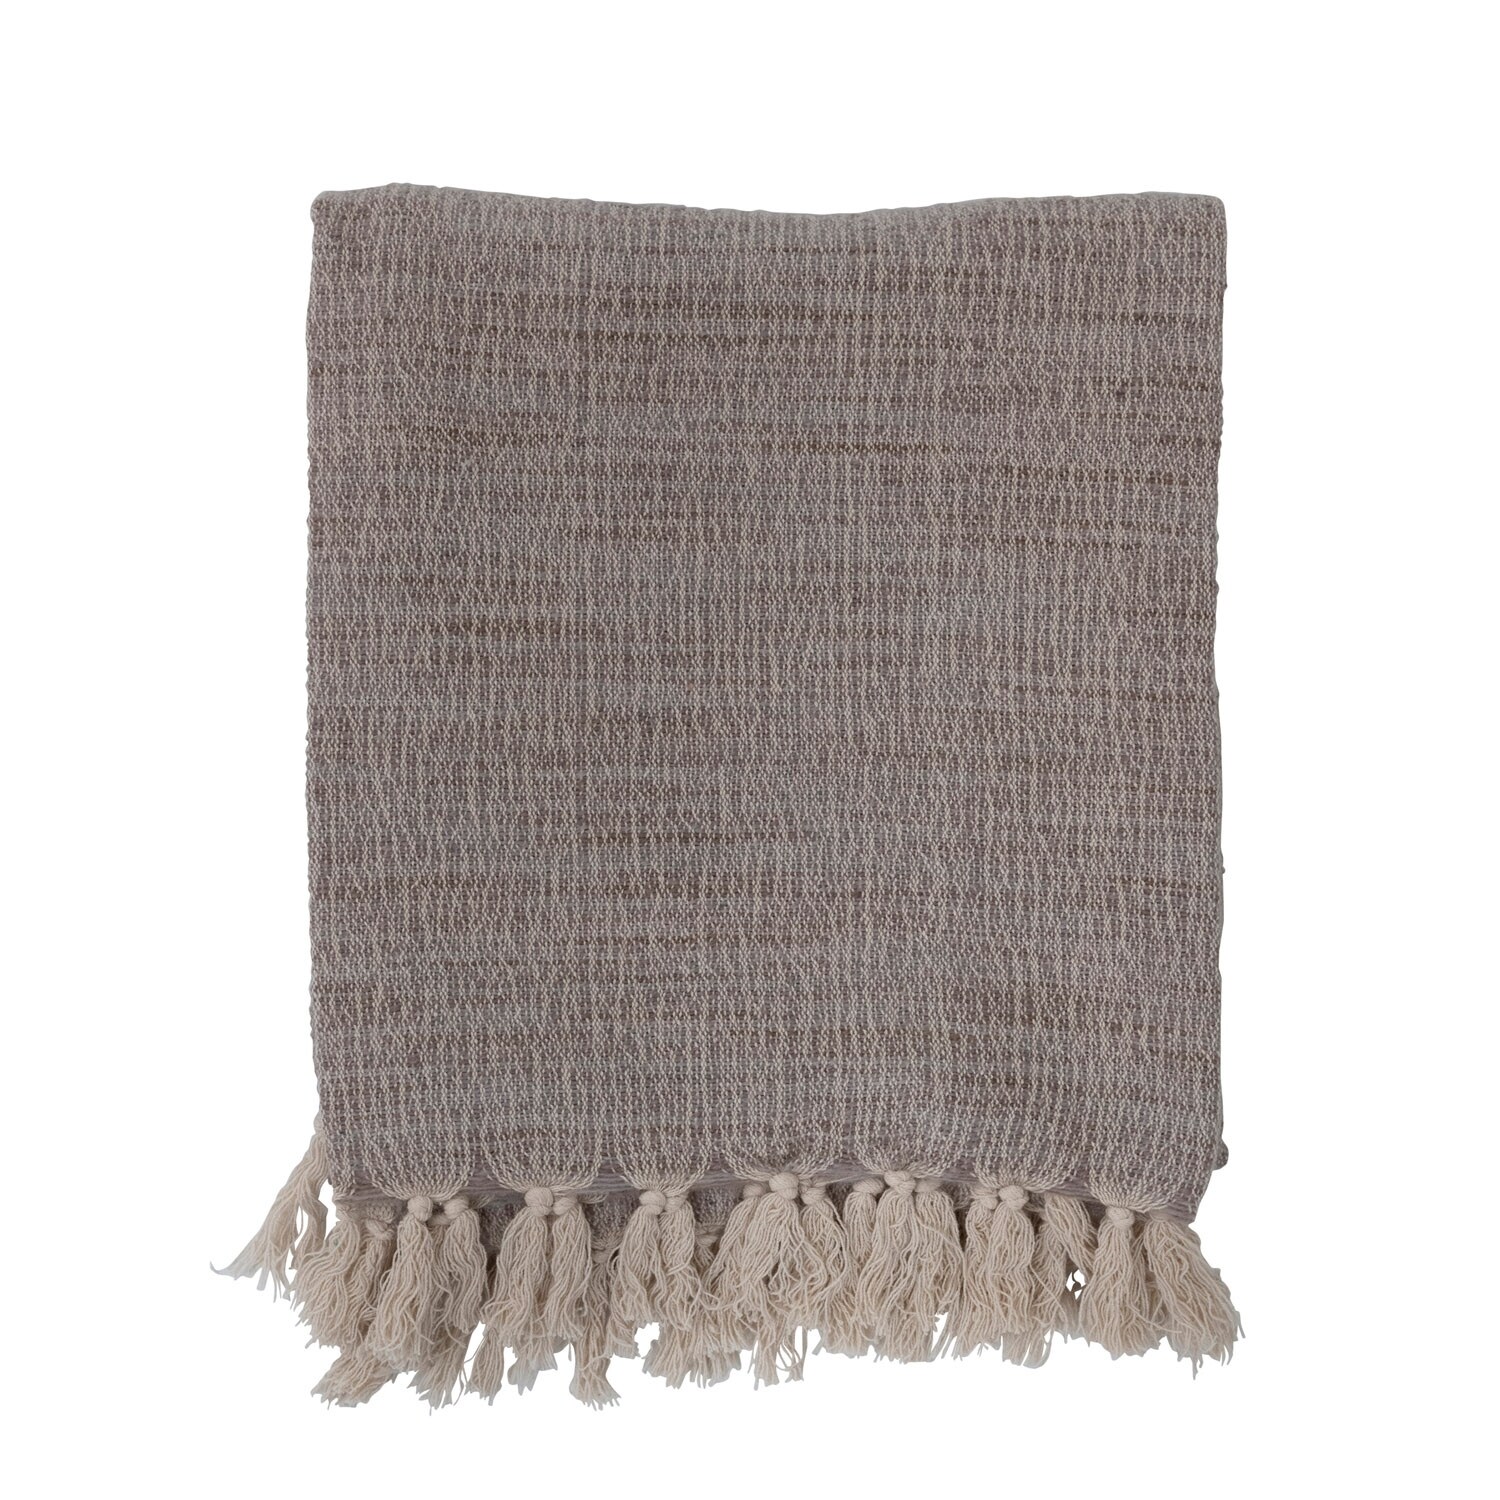 New Wool Blend Soft Throw Blanket with fringe 55x79" Woven Jacquard Pattern    